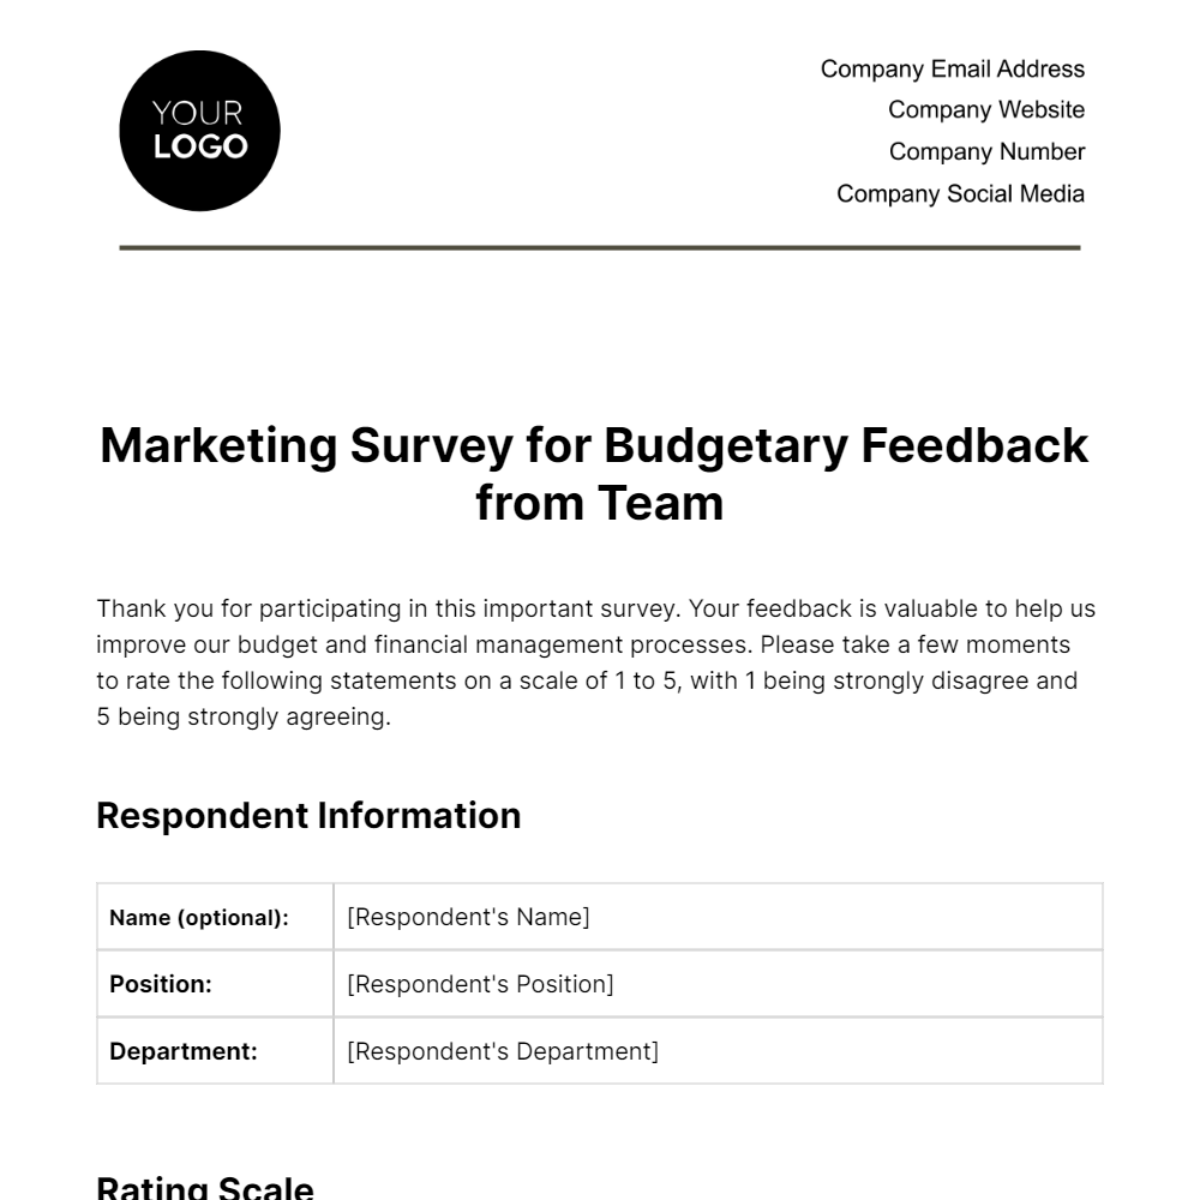 Free Marketing Survey for Budgetary Feedback from Team Template